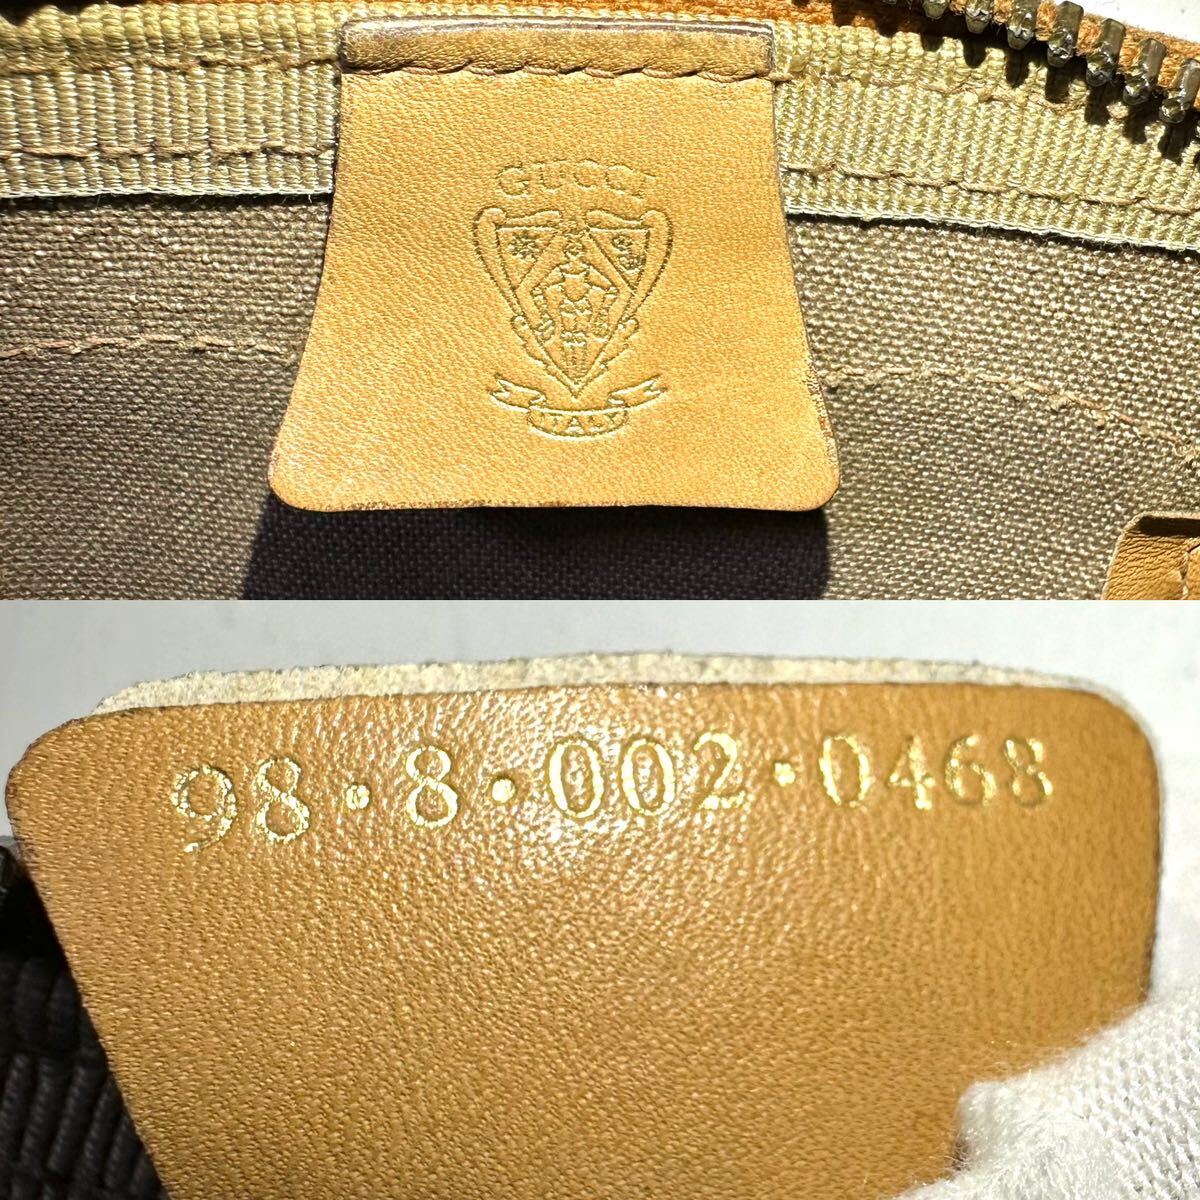 [ beautiful goods ]GUCCI Old Gucci GG pattern total pattern PVC leather Mini Boston bag handbag 98.002.3.0468 Gold metal fittings Italy made 